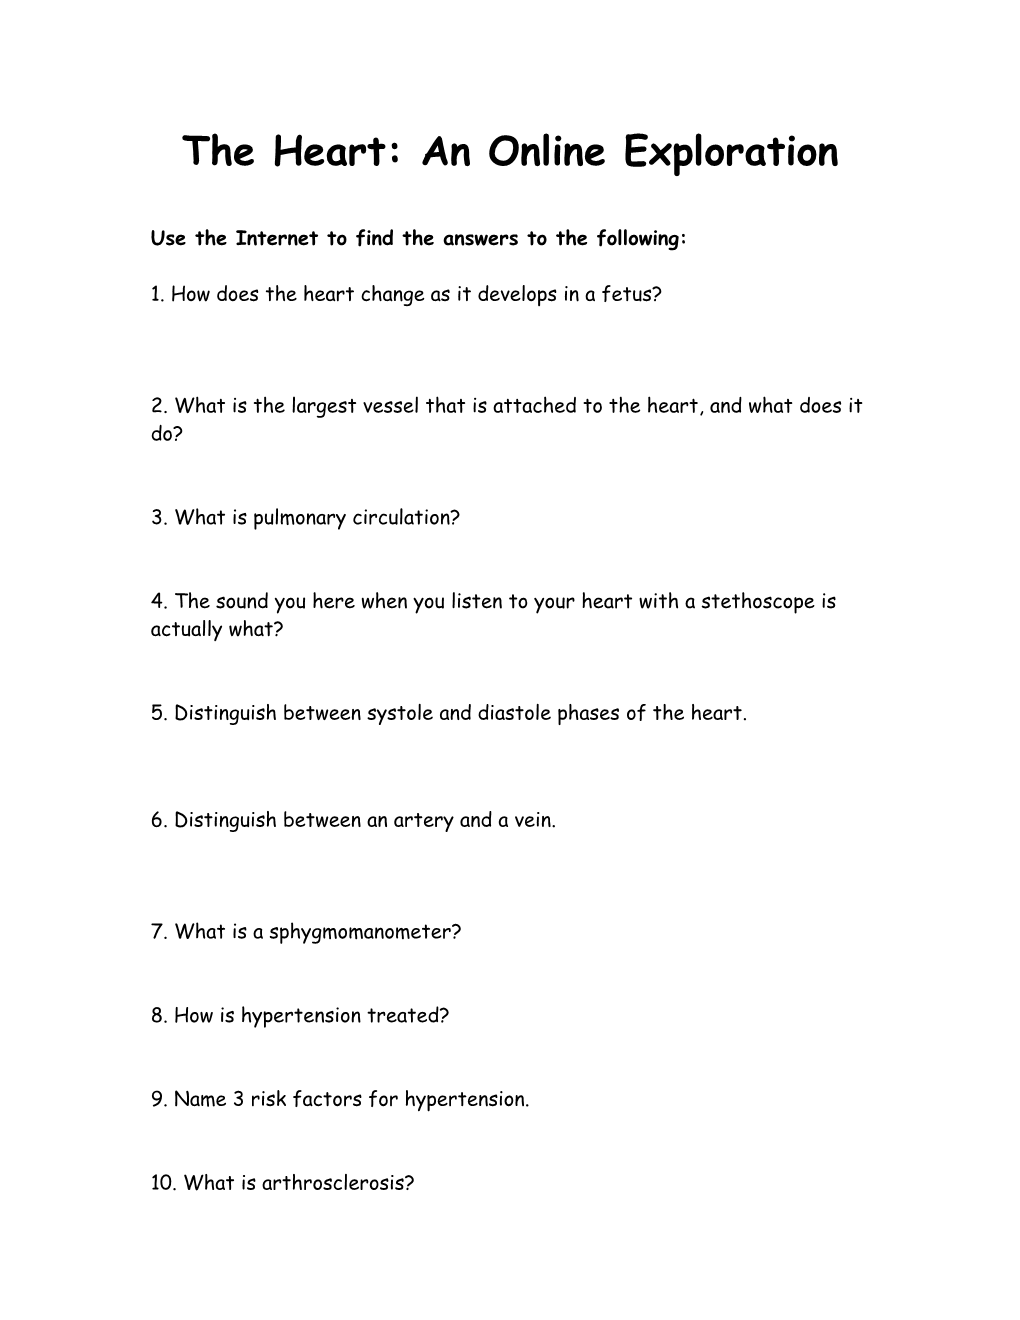 The Heart: an Online Exploration